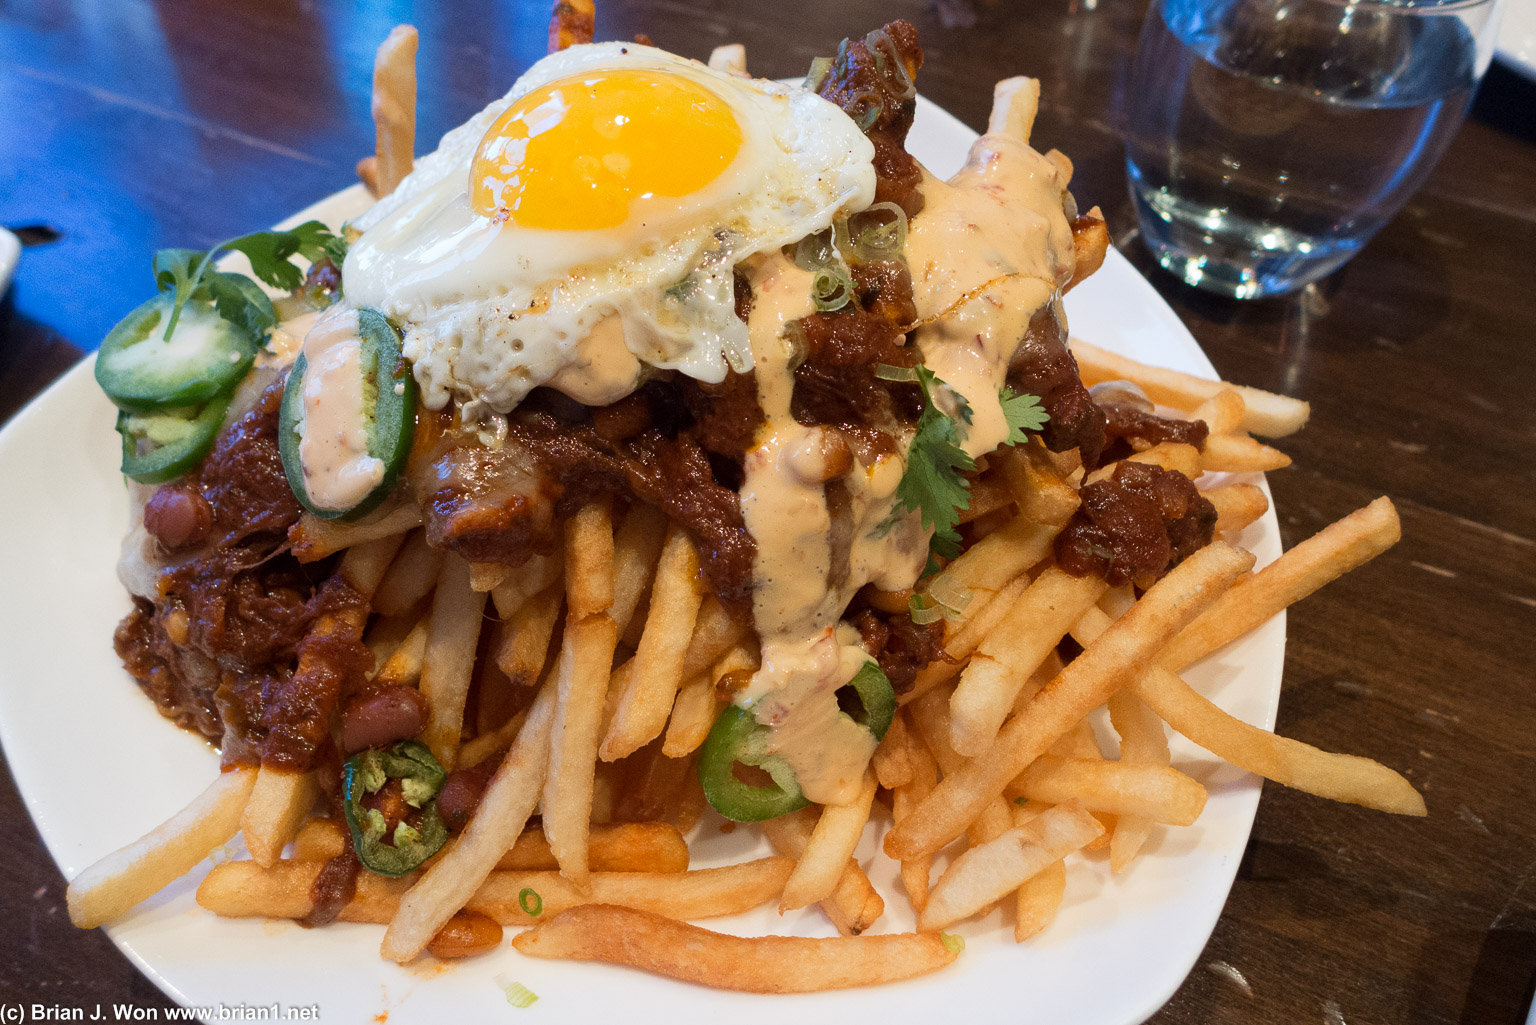 Ox-tail fries were a little crazy, but not as impressive as expected.